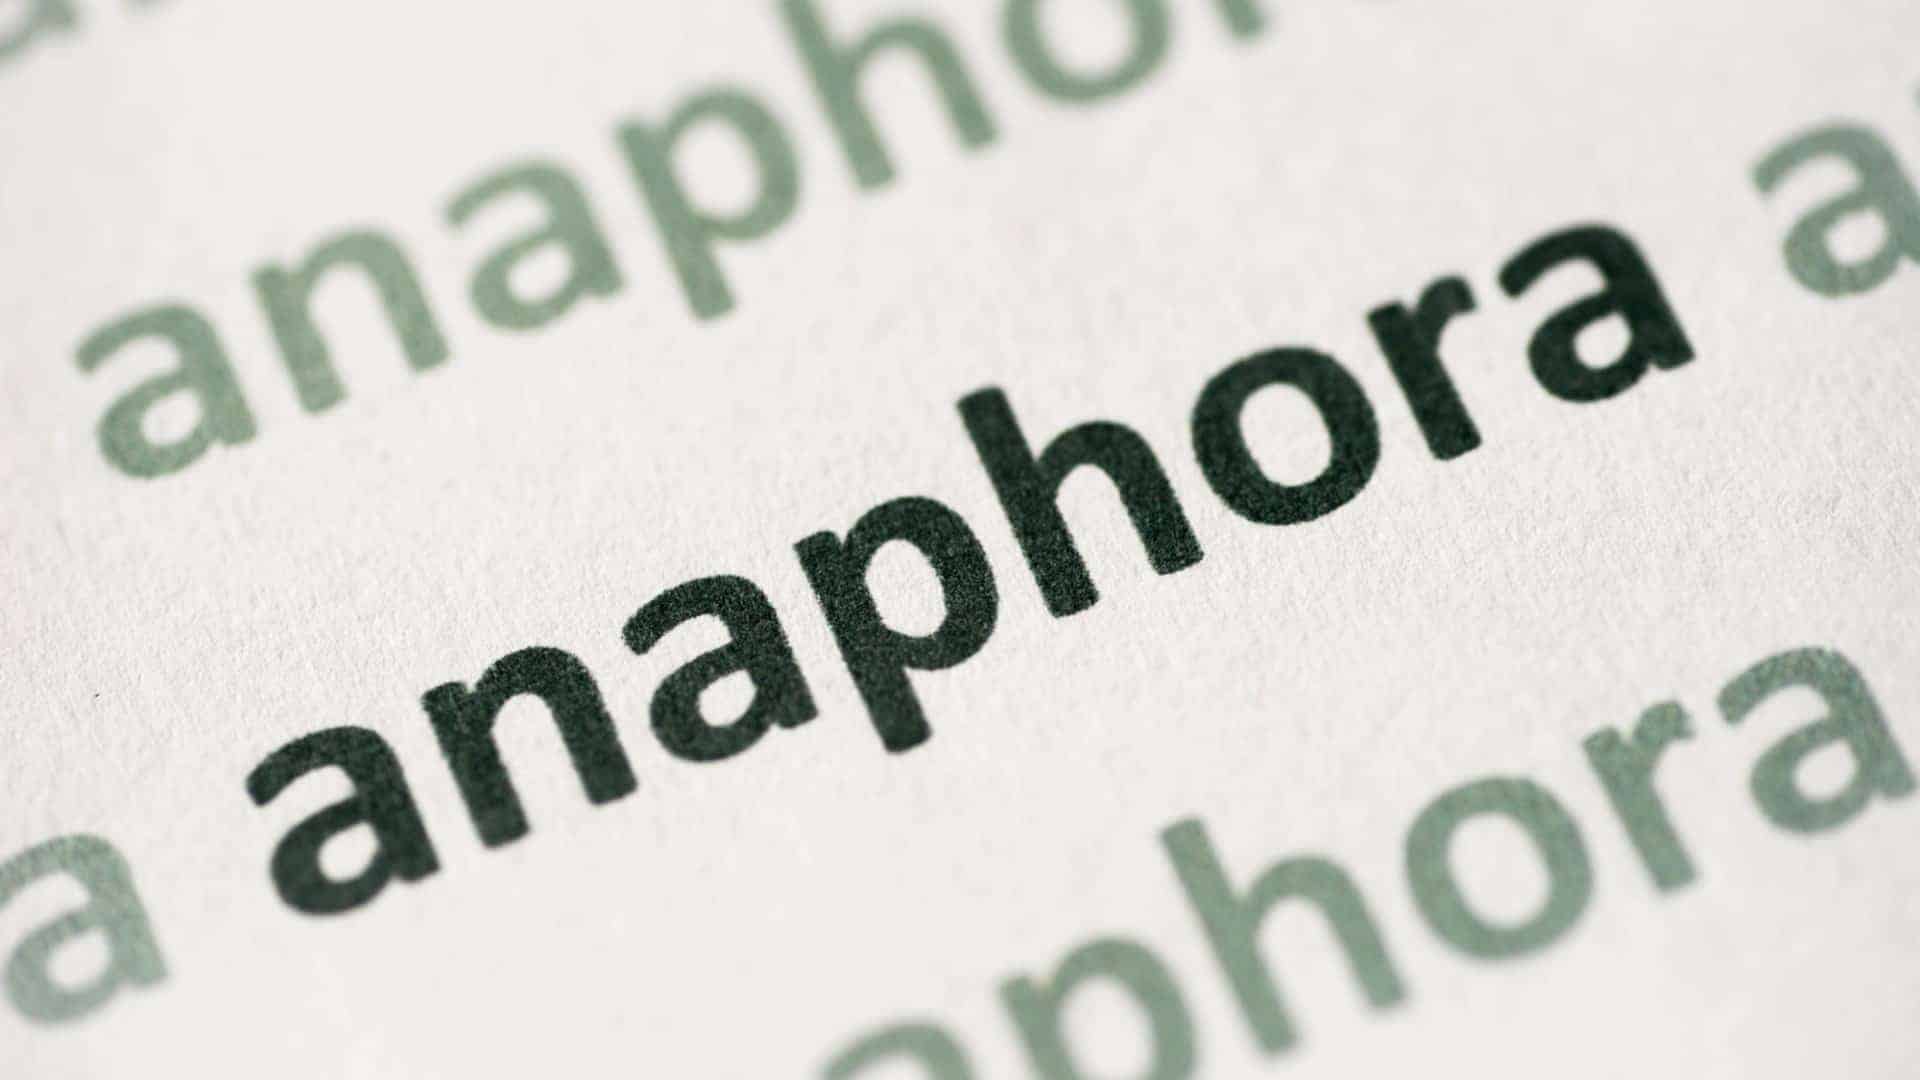 What Is Anaphora?